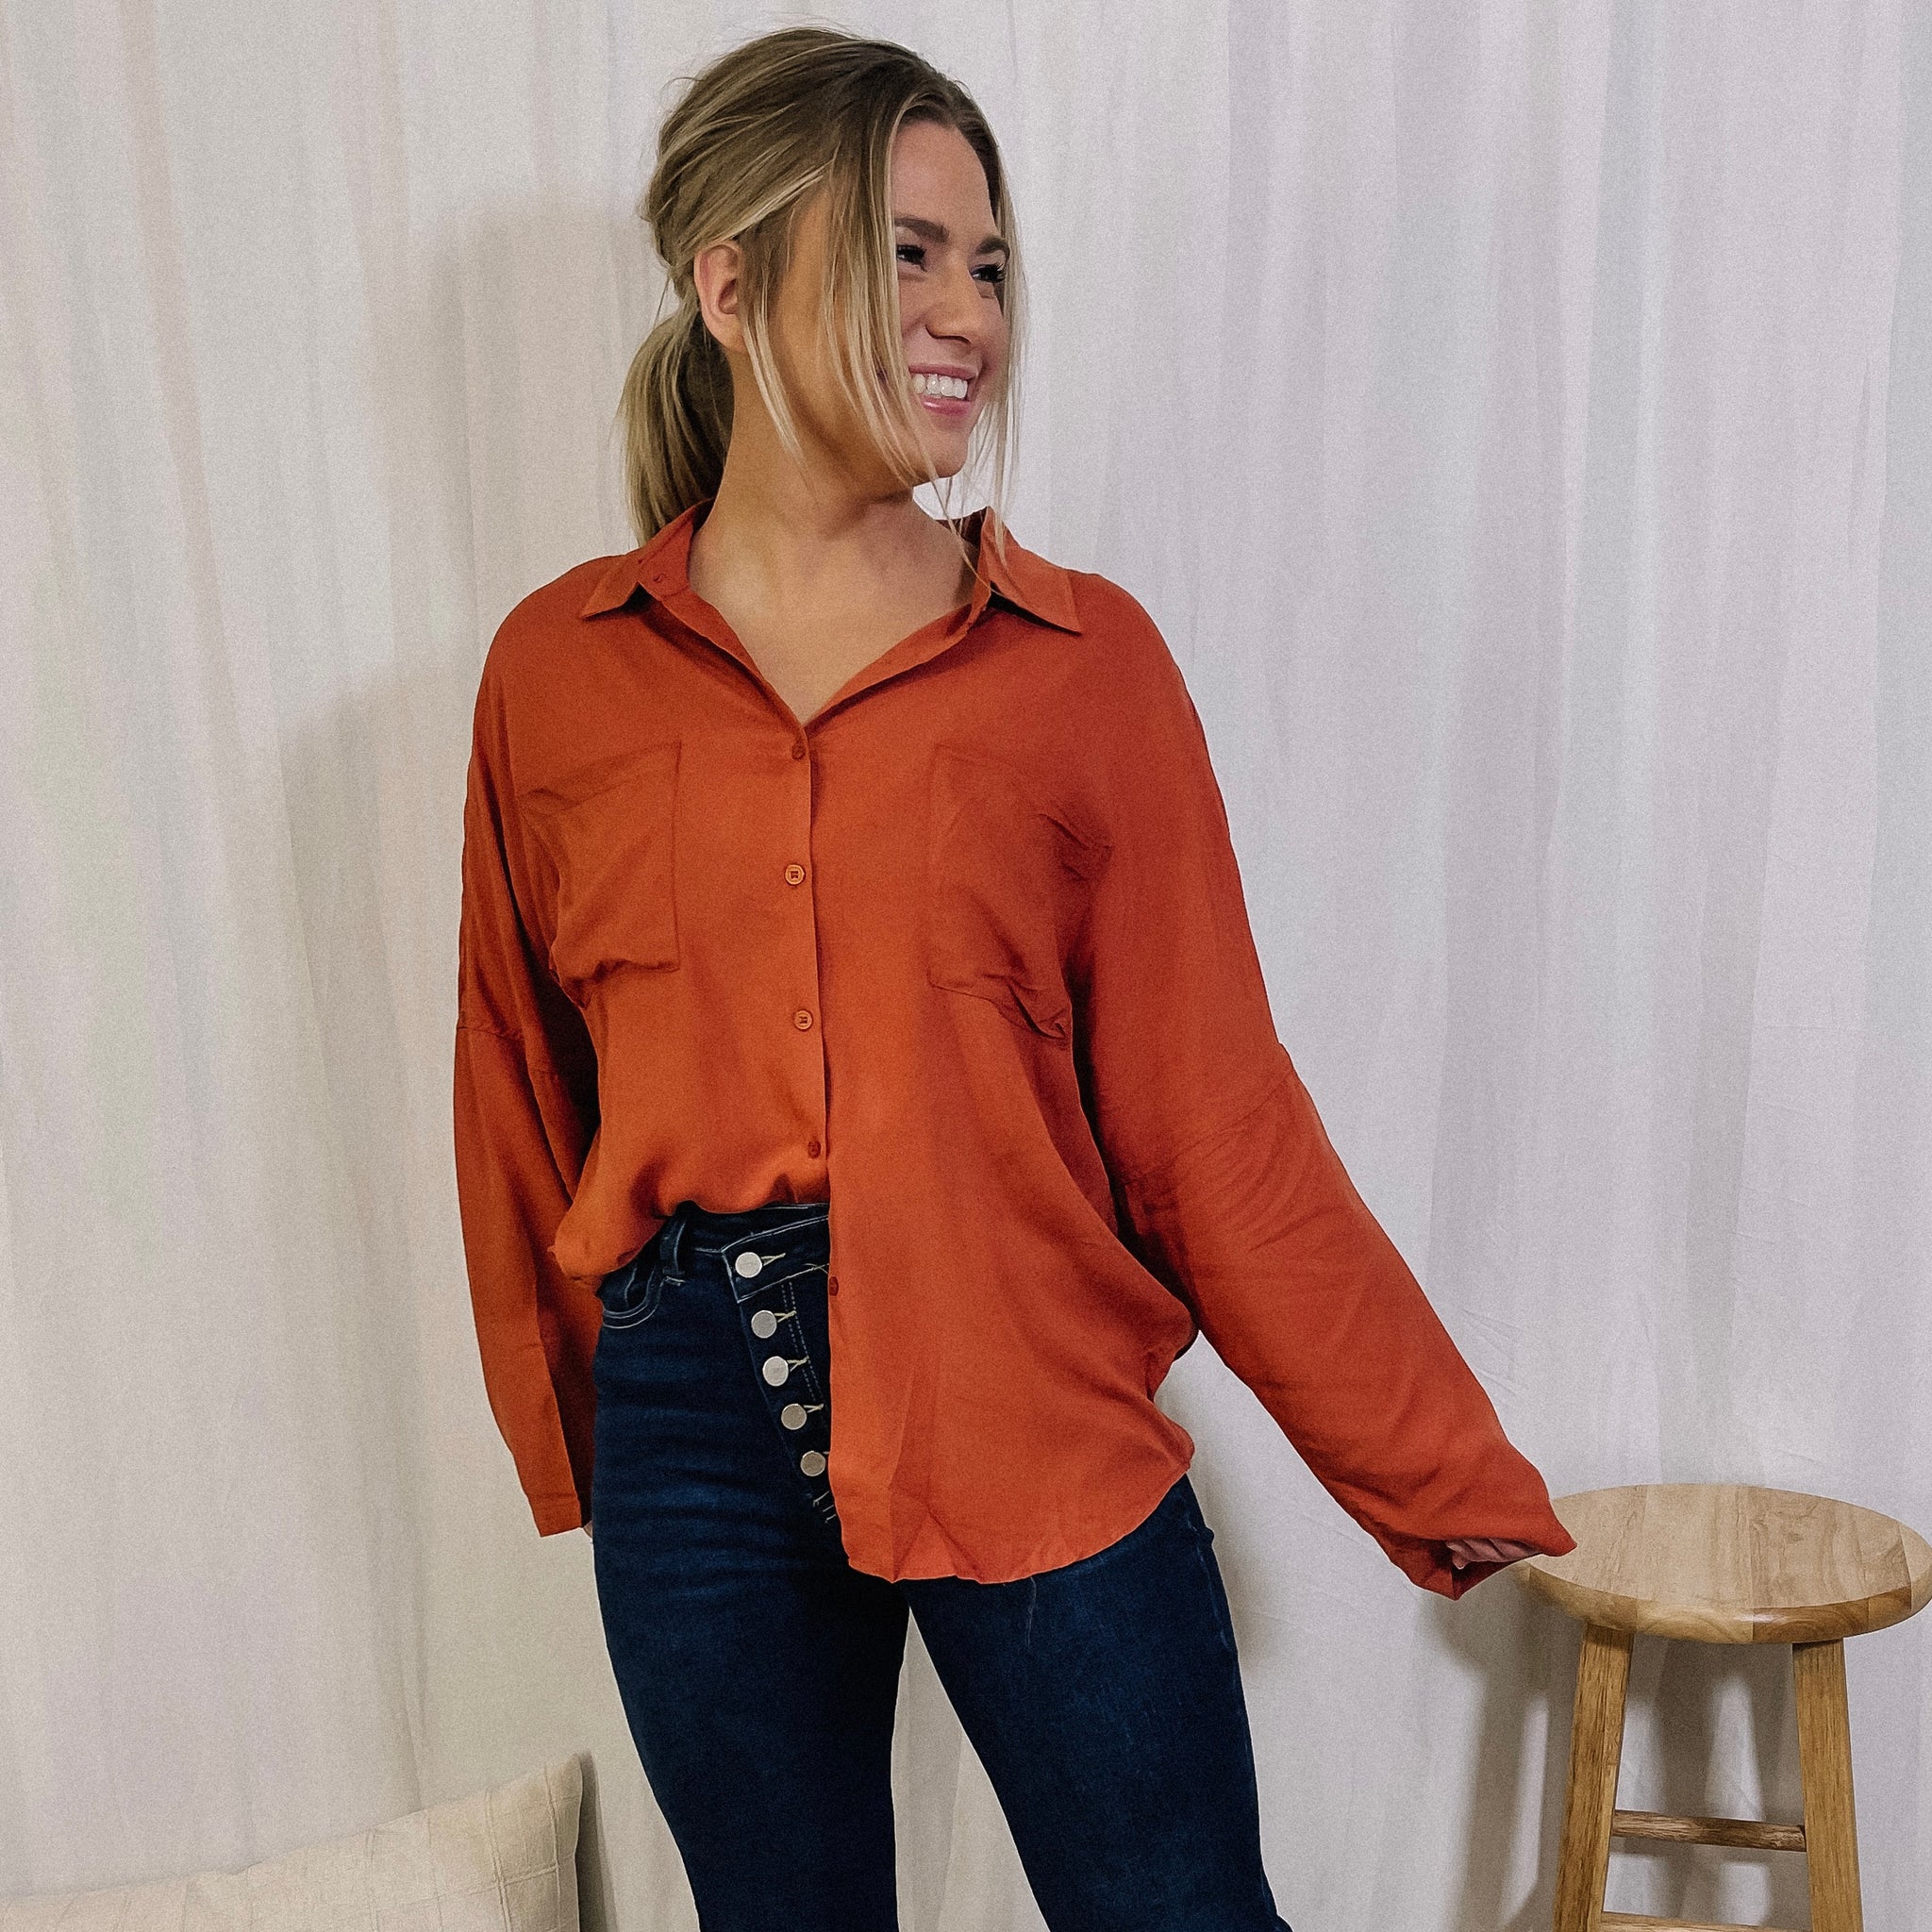 Sweet As Pie Button Up Top - LAST ONE